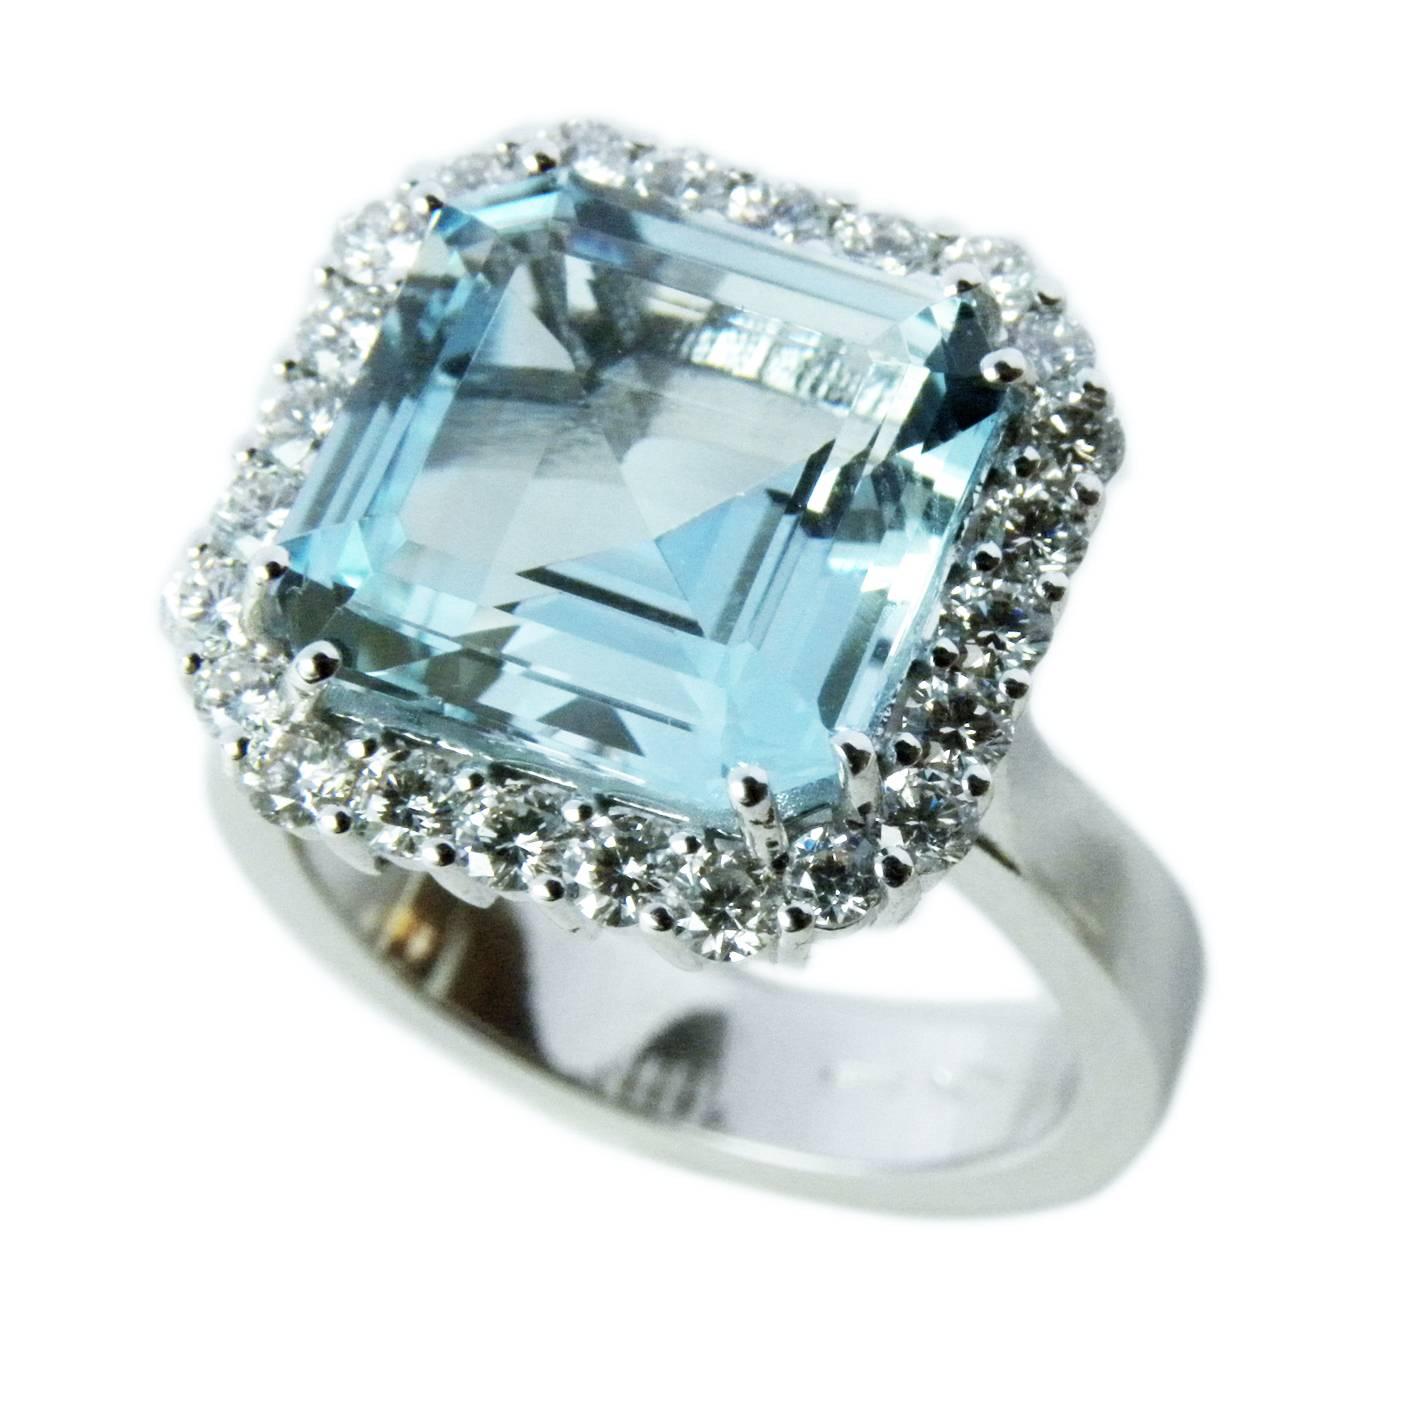 Chic and Timeless 3.67 Carat Natural Brazilian Aquamarine Pricess Cut in a 0.51 Carat White Diamond Setting Engagement or Cocktail Ring.
In our fitted burgundy leather case.
A detailed Gemmological Certificate is included.

US size 6 French size